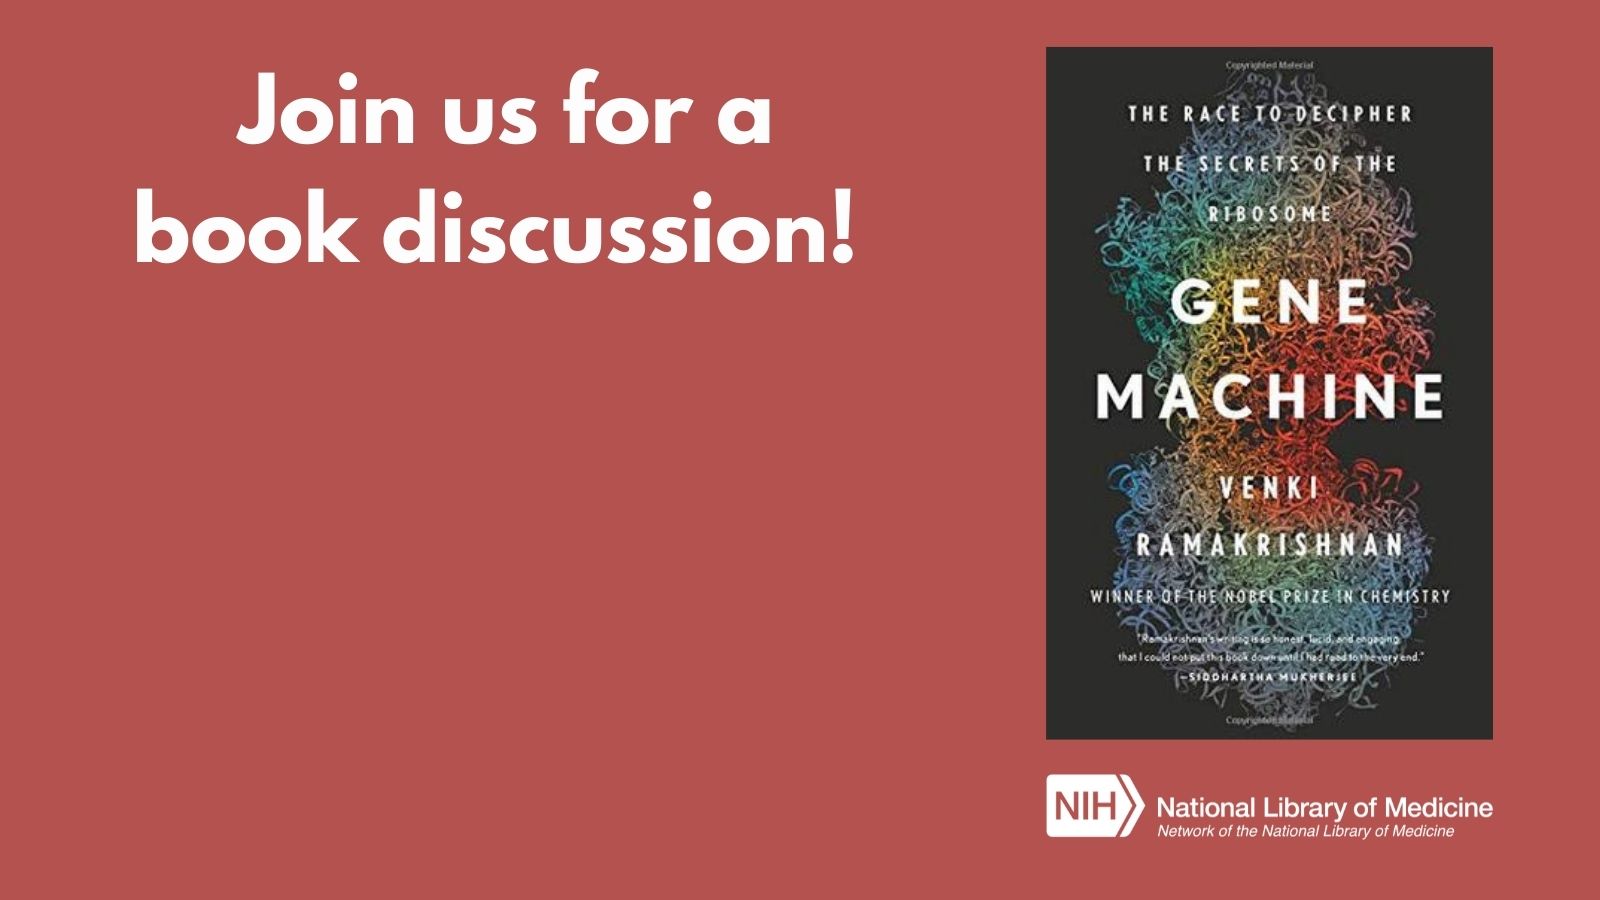 Join Us for a Discussion of Gene Machine